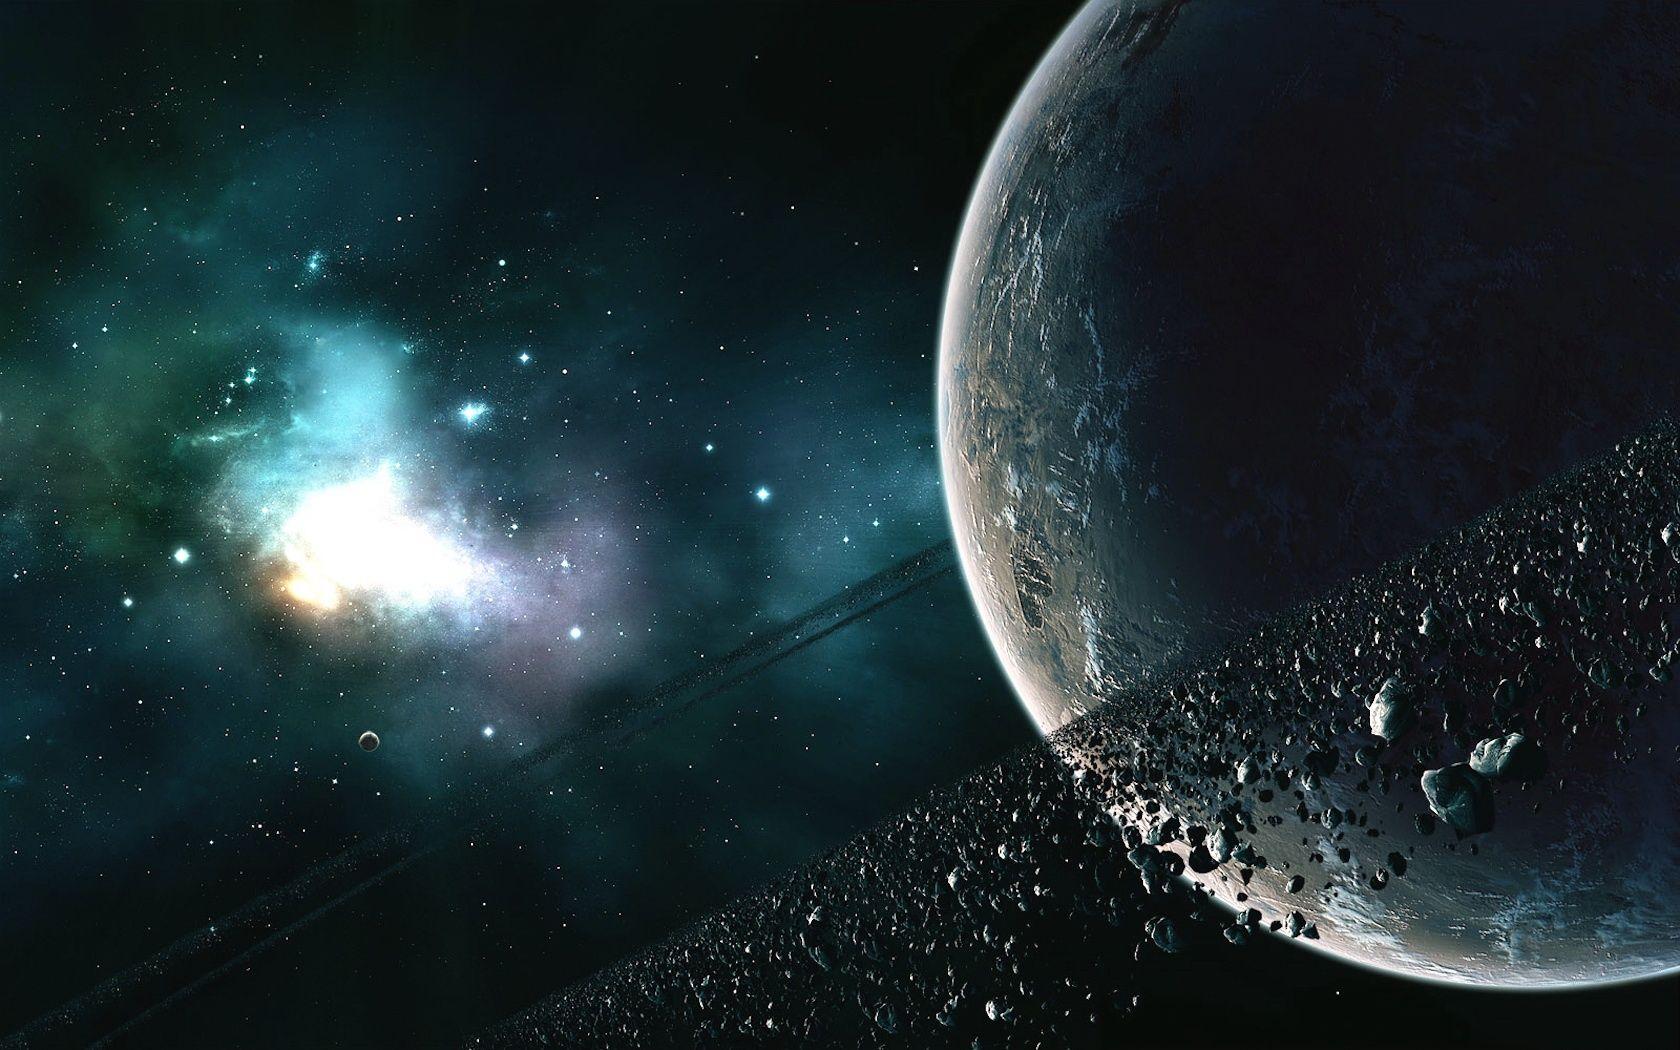 The ring of asteroids wallpaper and image, picture